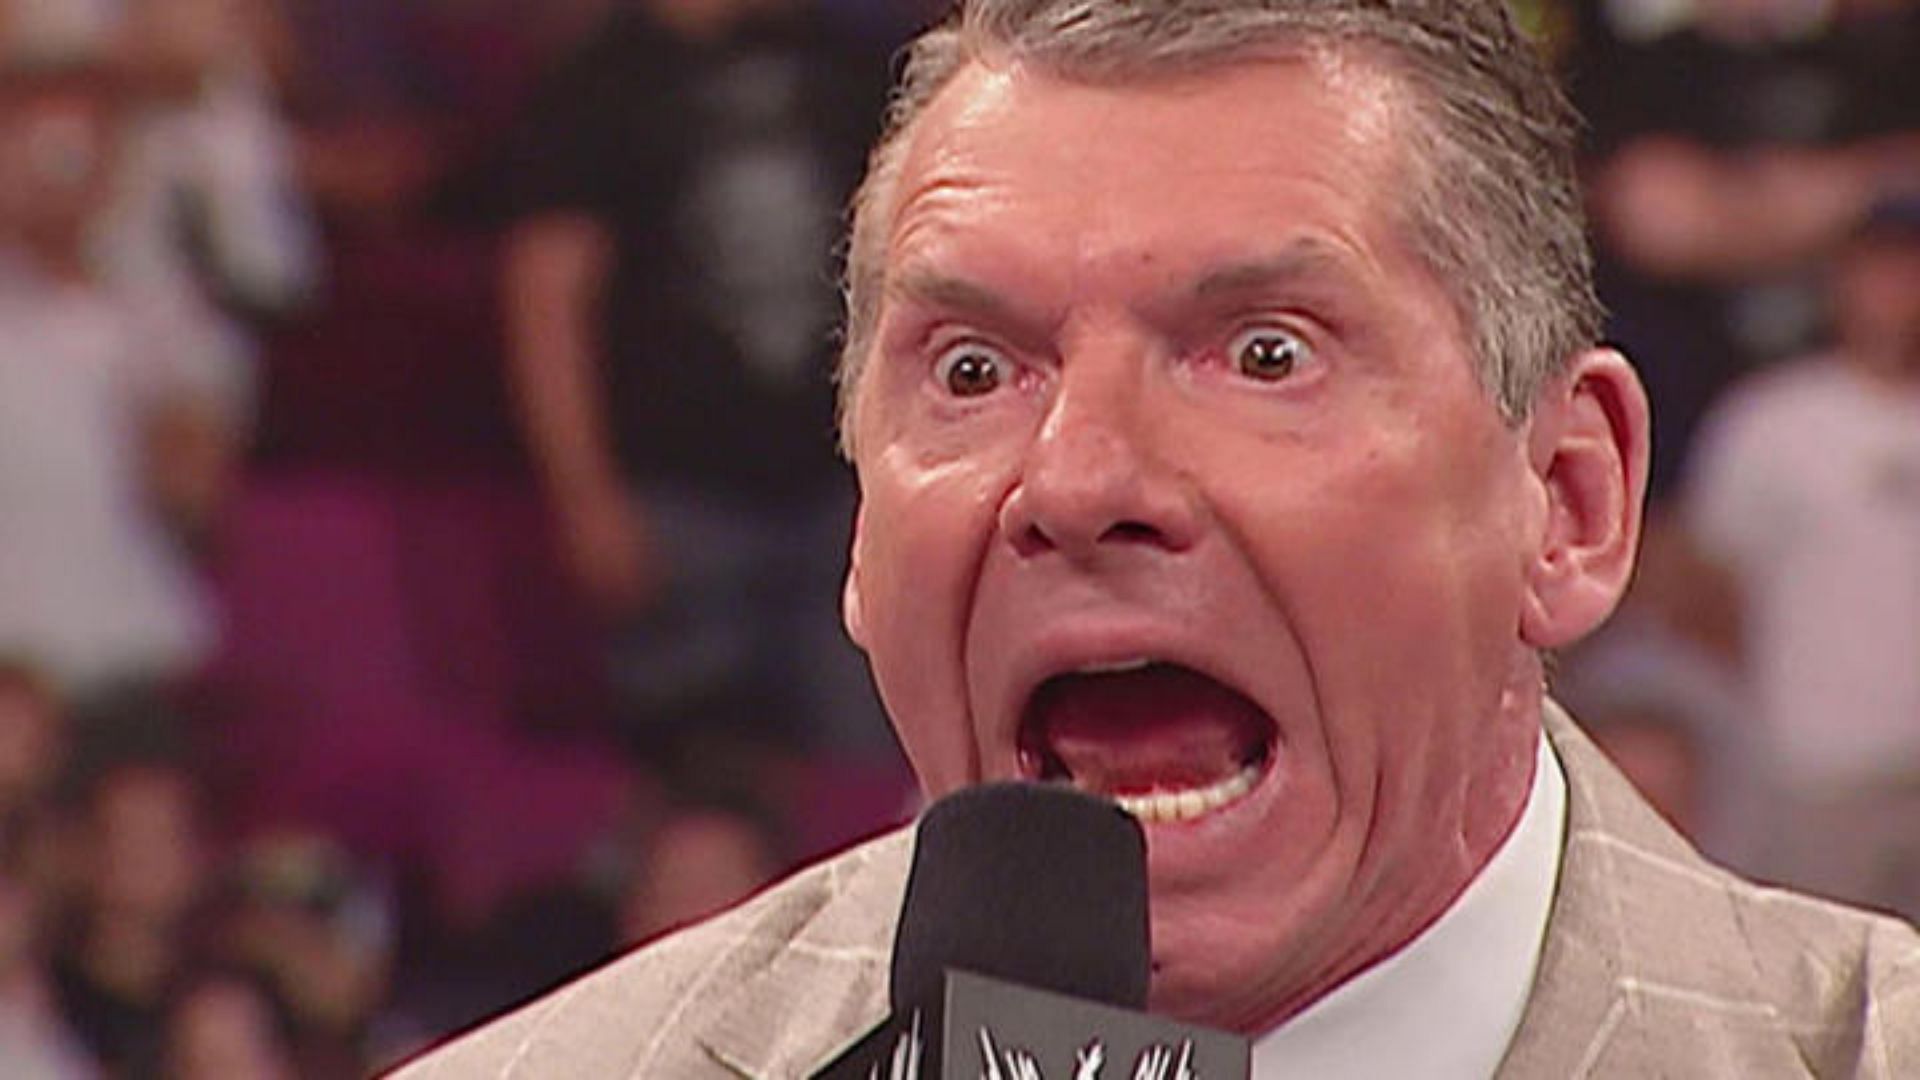 What is next for Vince McMahon? (Image Credits: WWE Videos)